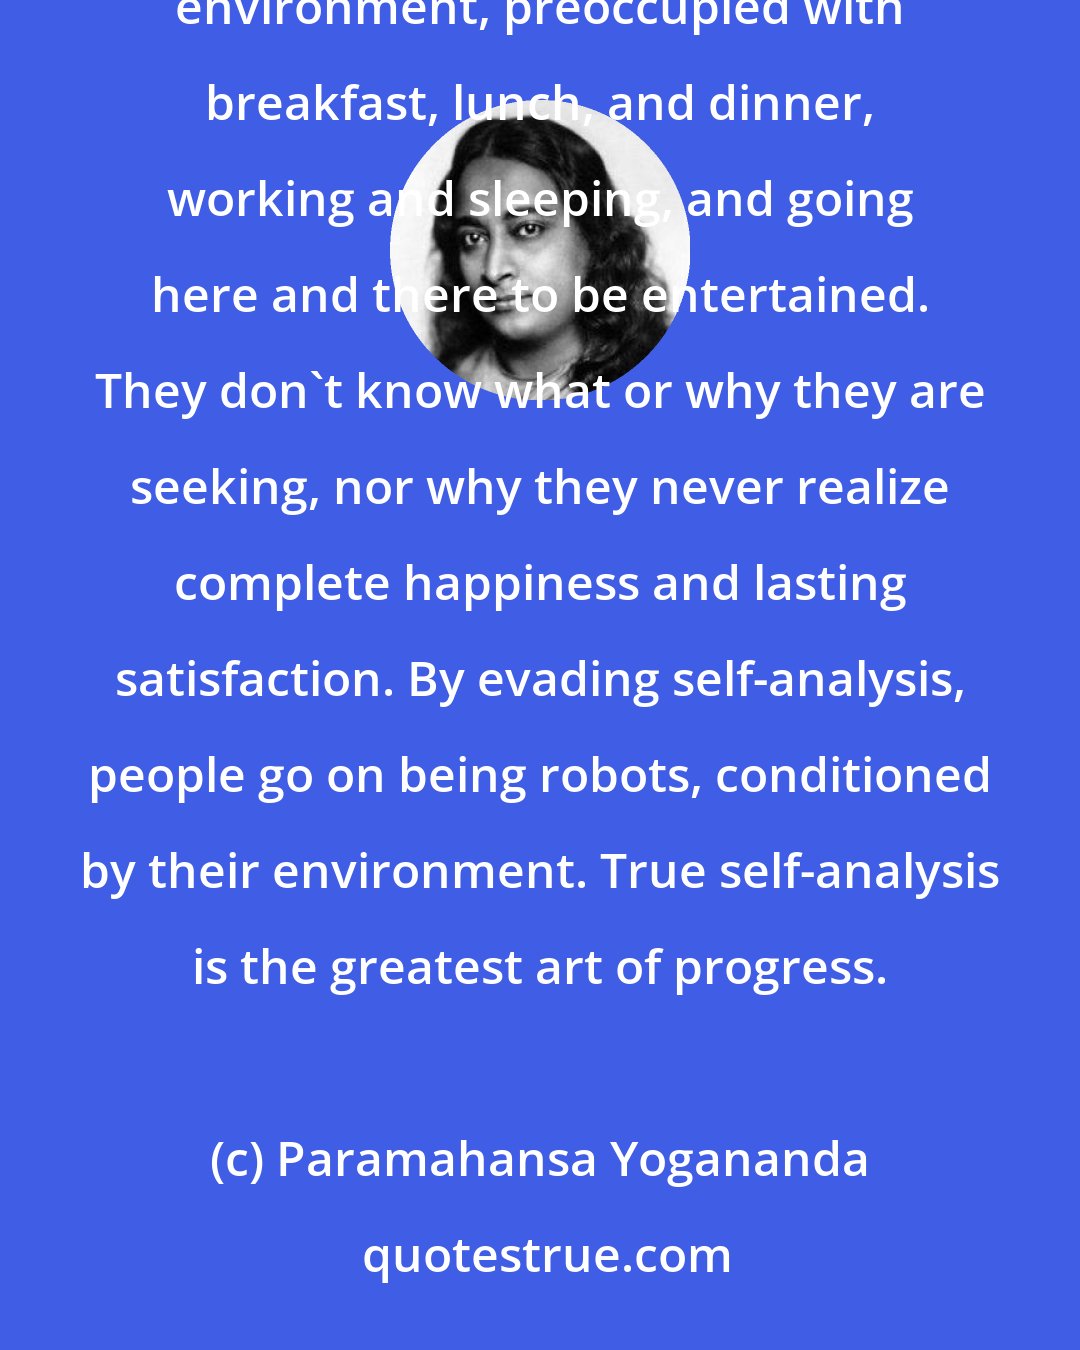 Paramahansa Yogananda: Millions of people never analyze themselves. Mentally they are mechanical products of the factory of their environment, preoccupied with breakfast, lunch, and dinner, working and sleeping, and going here and there to be entertained. They don't know what or why they are seeking, nor why they never realize complete happiness and lasting satisfaction. By evading self-analysis, people go on being robots, conditioned by their environment. True self-analysis is the greatest art of progress.